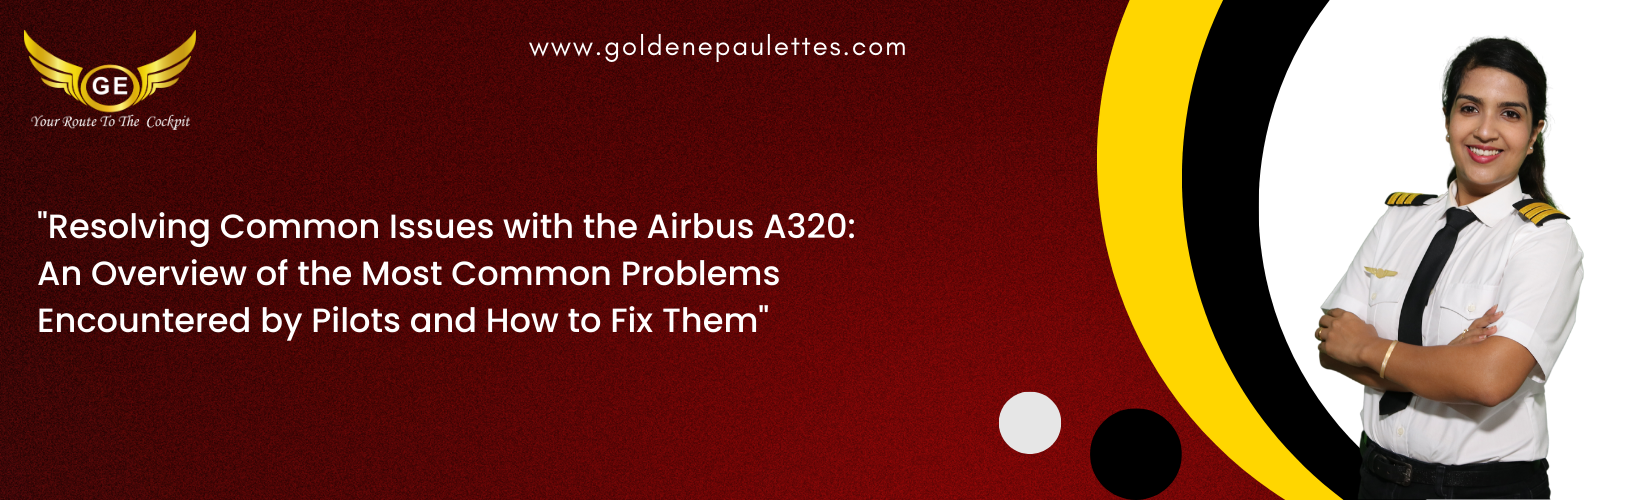 Common Problems with the Airbus A320